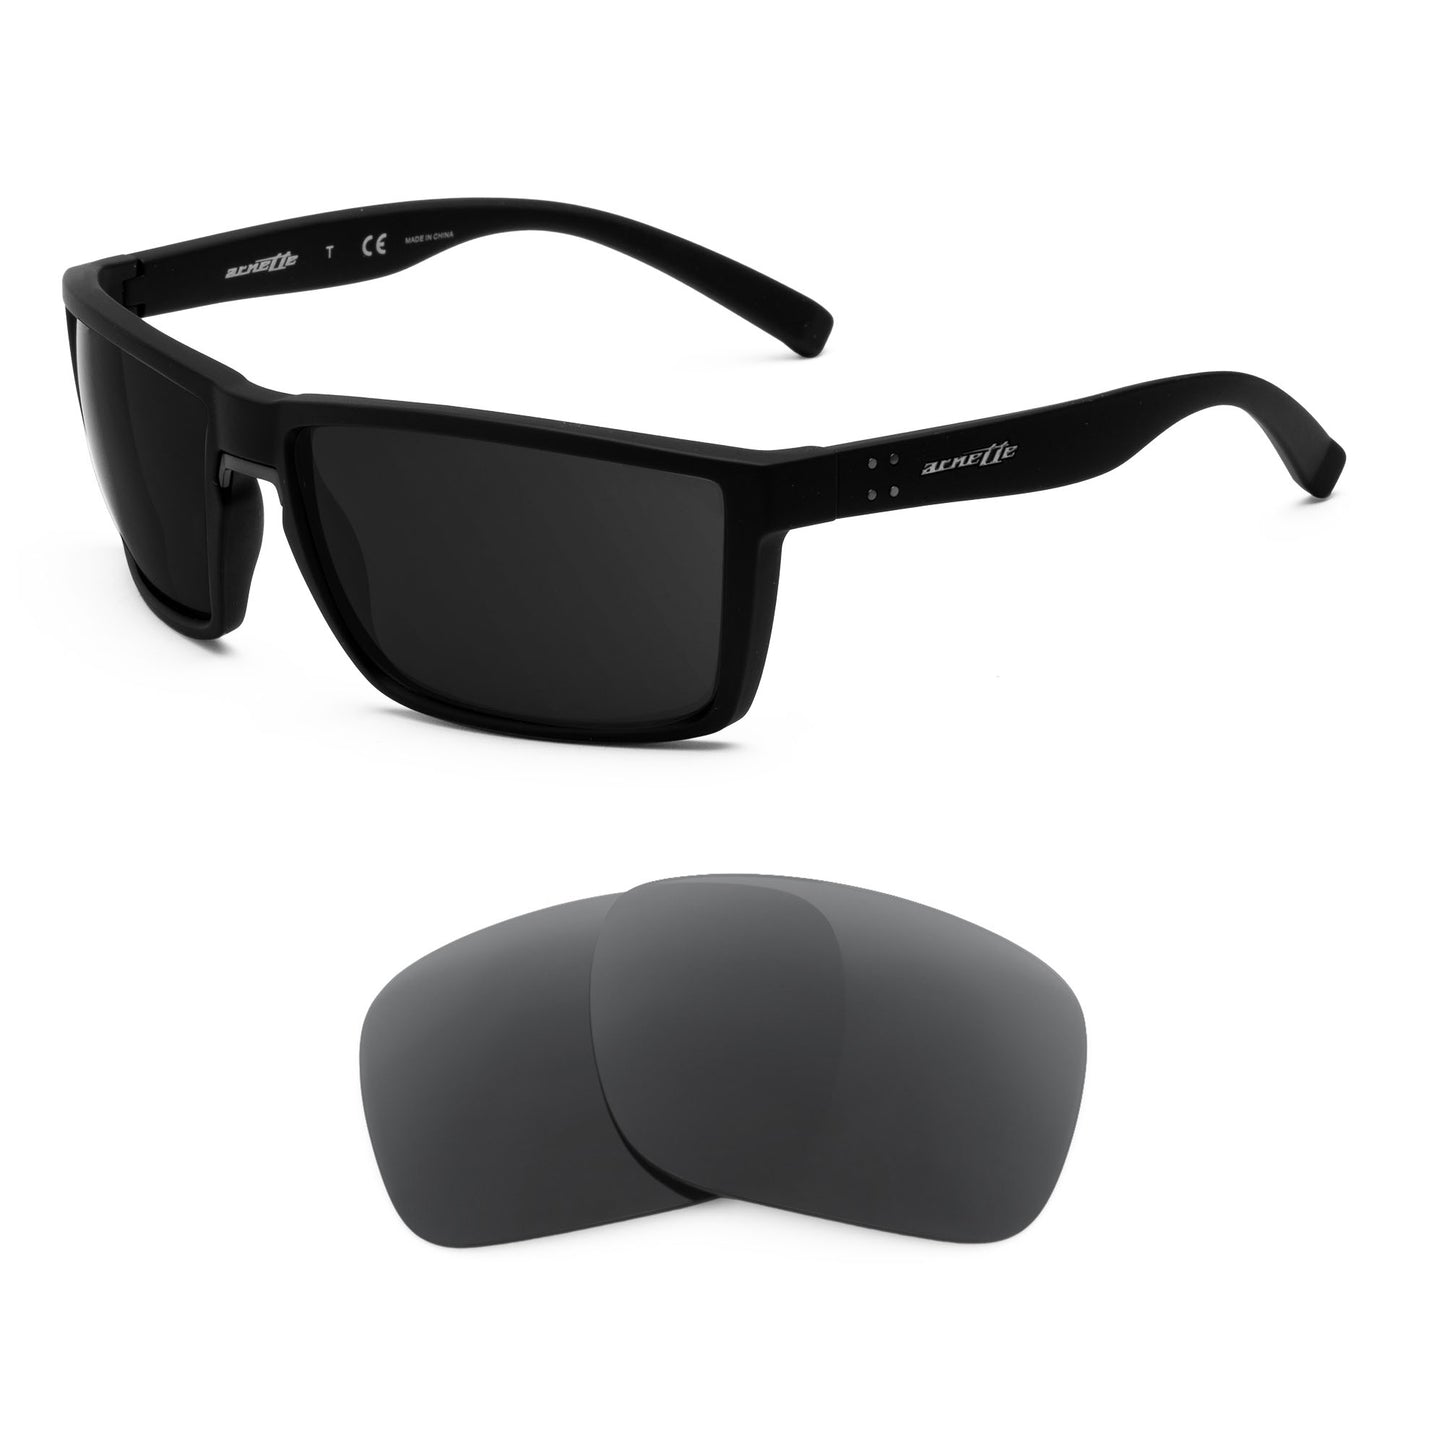 Arnette Prydz AN4253 sunglasses with replacement lenses